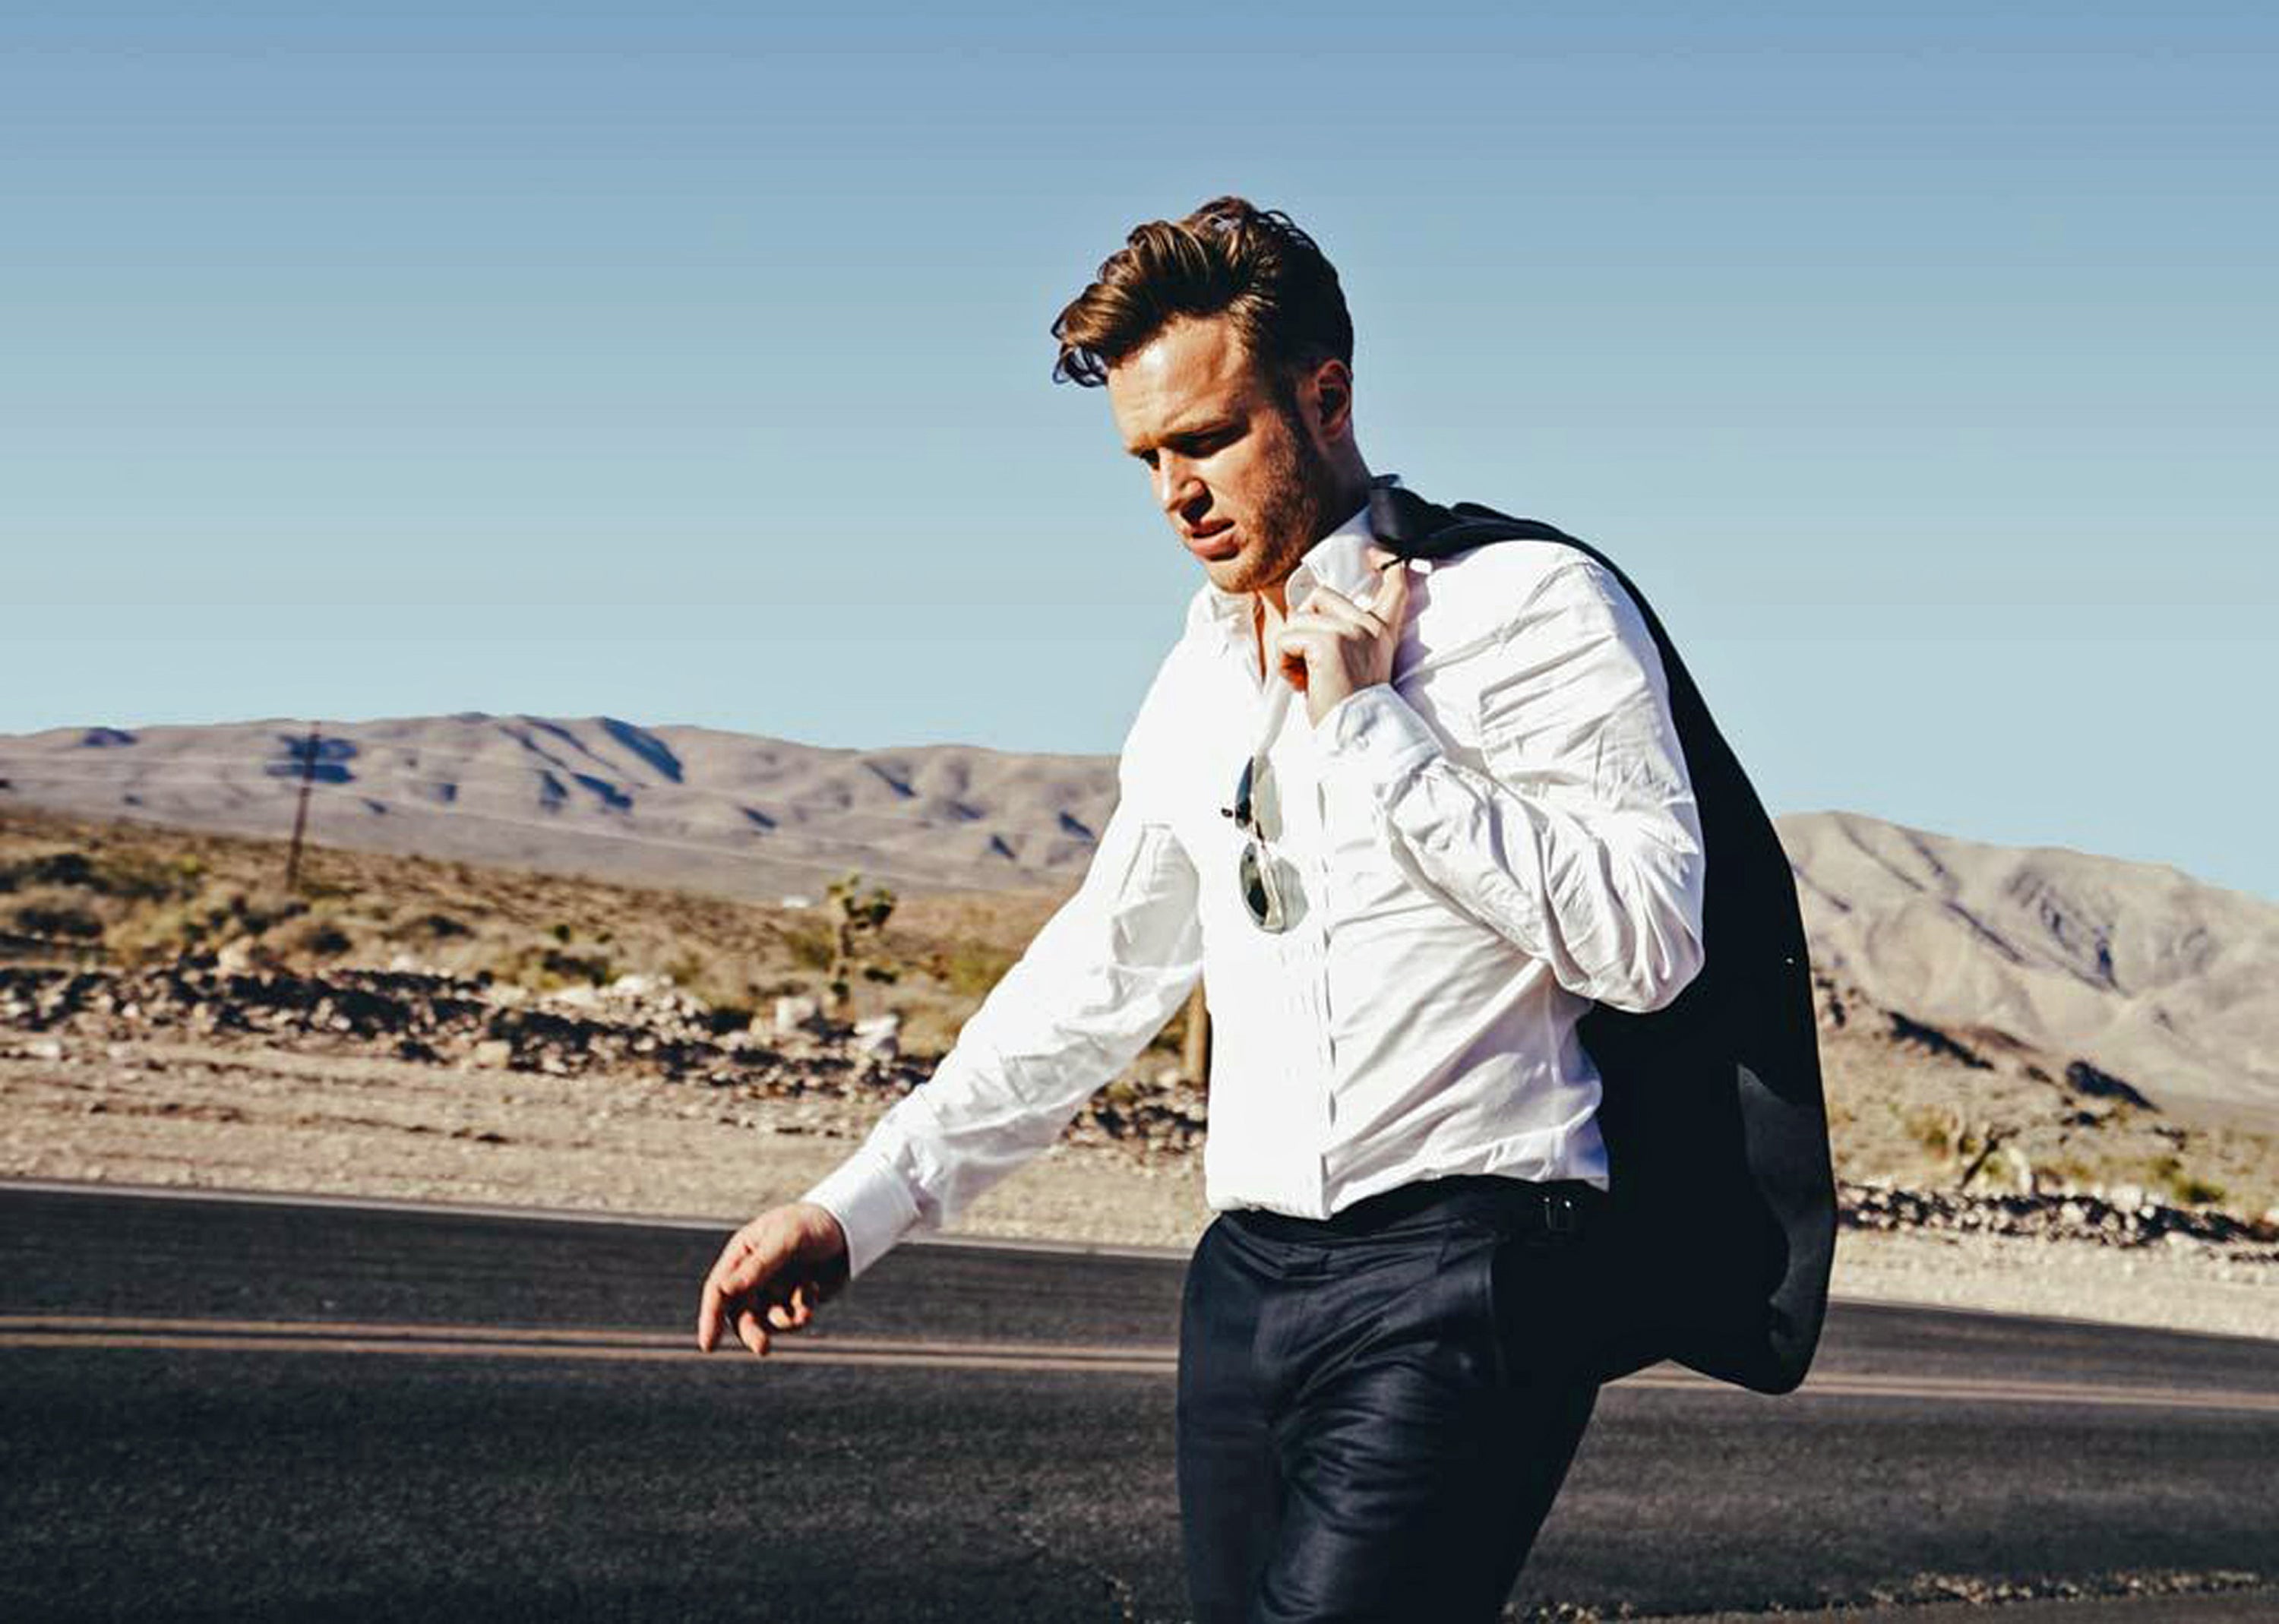 Olly Murs - High Lodge Thetford Forest in Thetford promo photo for Ticketmaster presale offer code